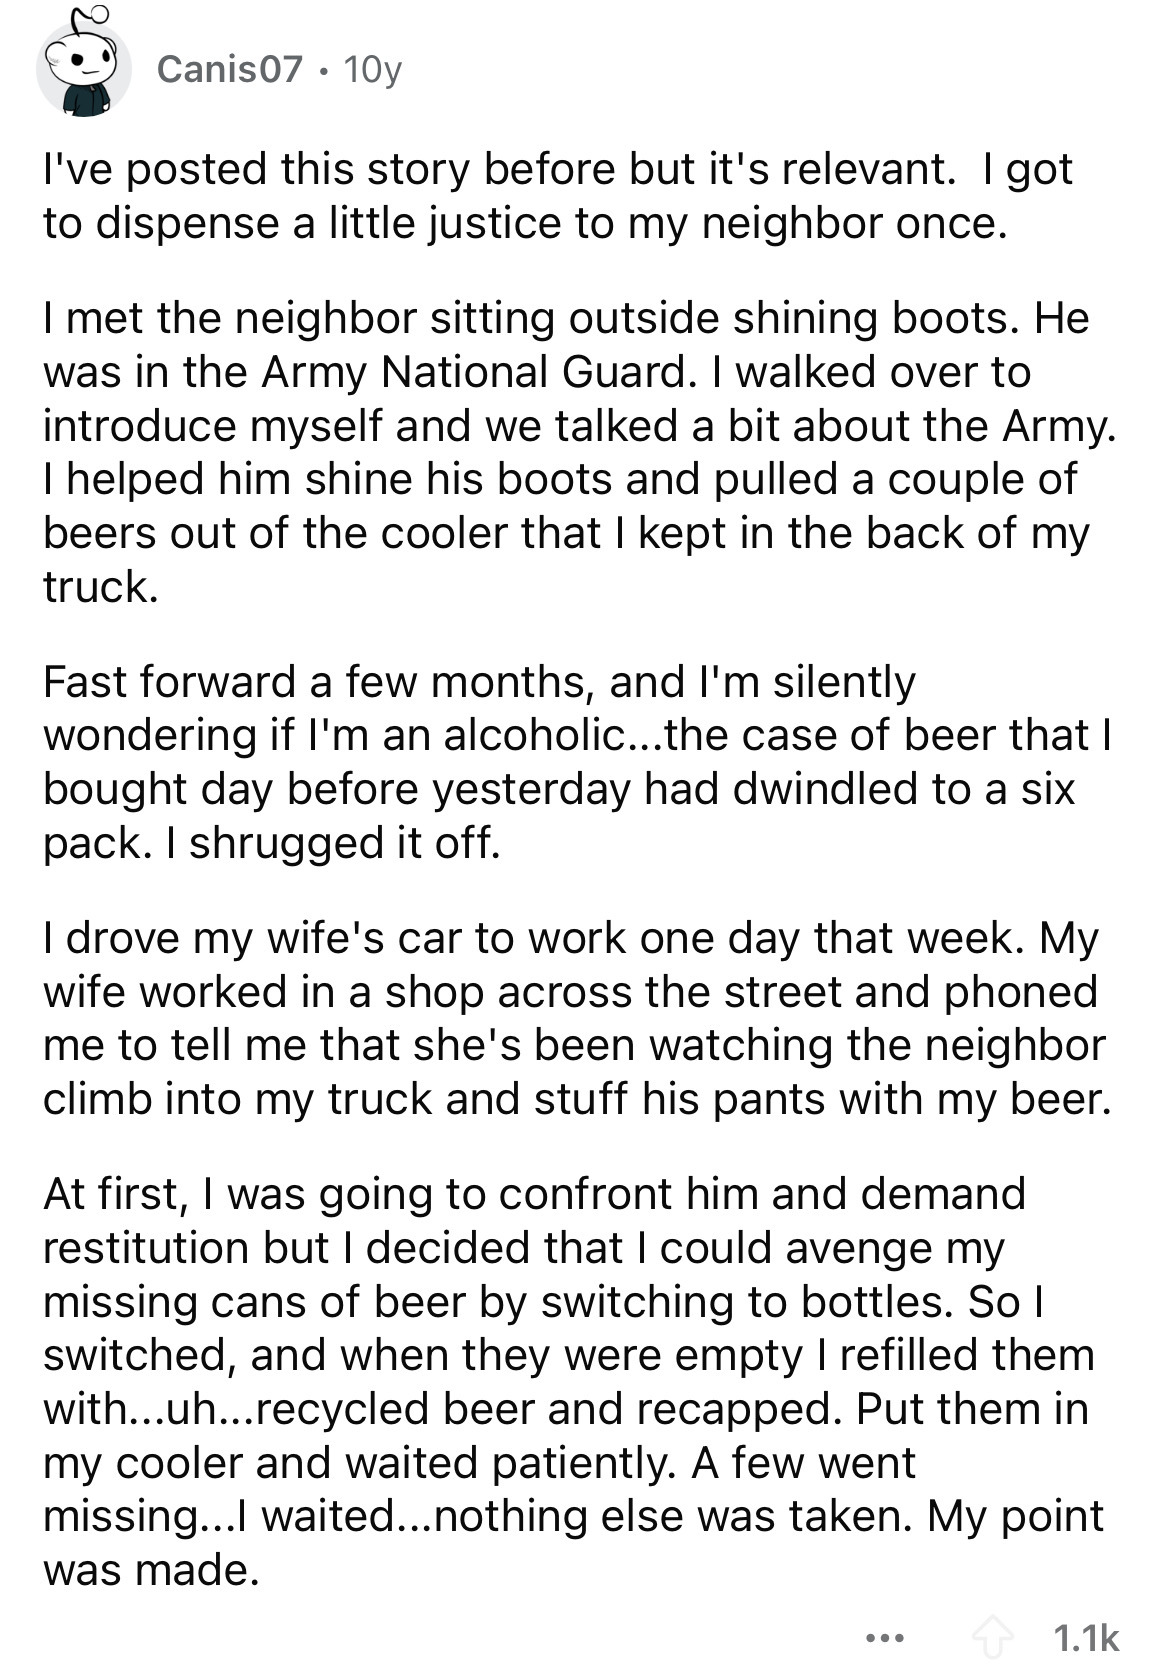 document - Canis07. 10y I've posted this story before but it's relevant. I got to dispense a little justice to my neighbor once. I met the neighbor sitting outside shining boots. He was in the Army National Guard. I walked over to introduce myself and we 